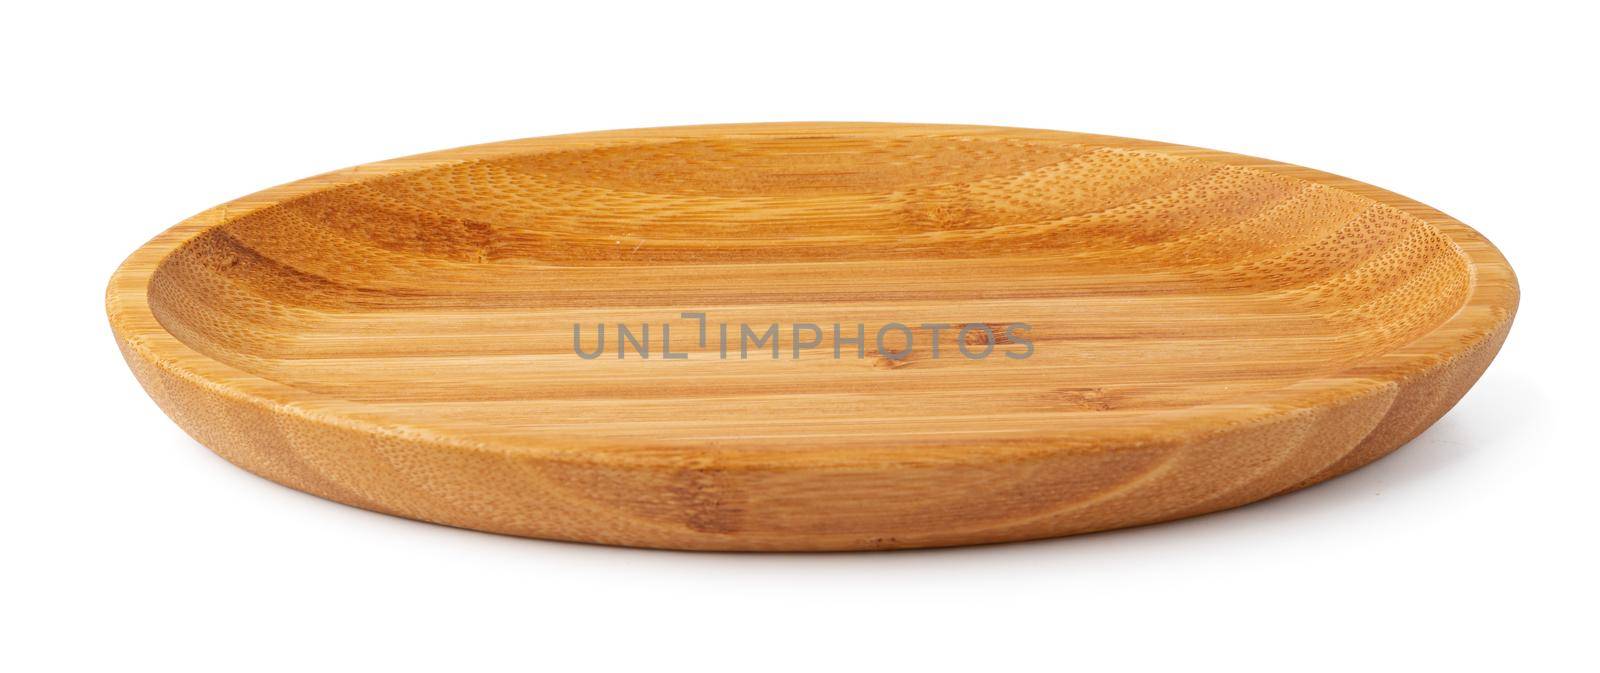 Wooden plate isolated on white background, close up photo